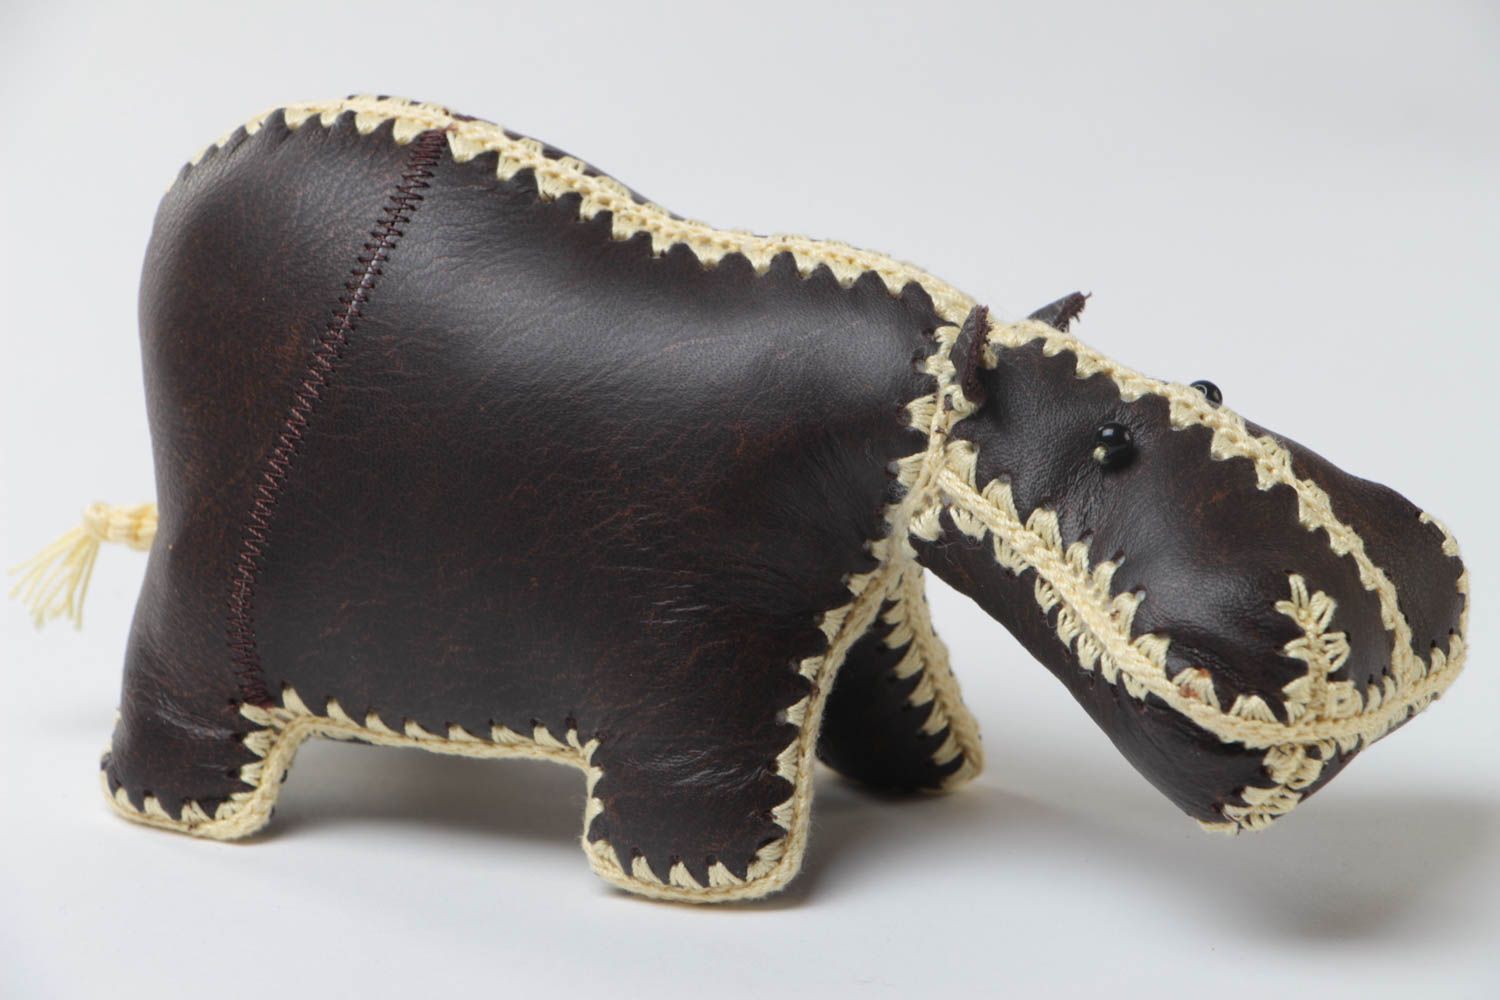 Handmade large designer soft toy sewn of dark leather with light threads Hippo photo 2